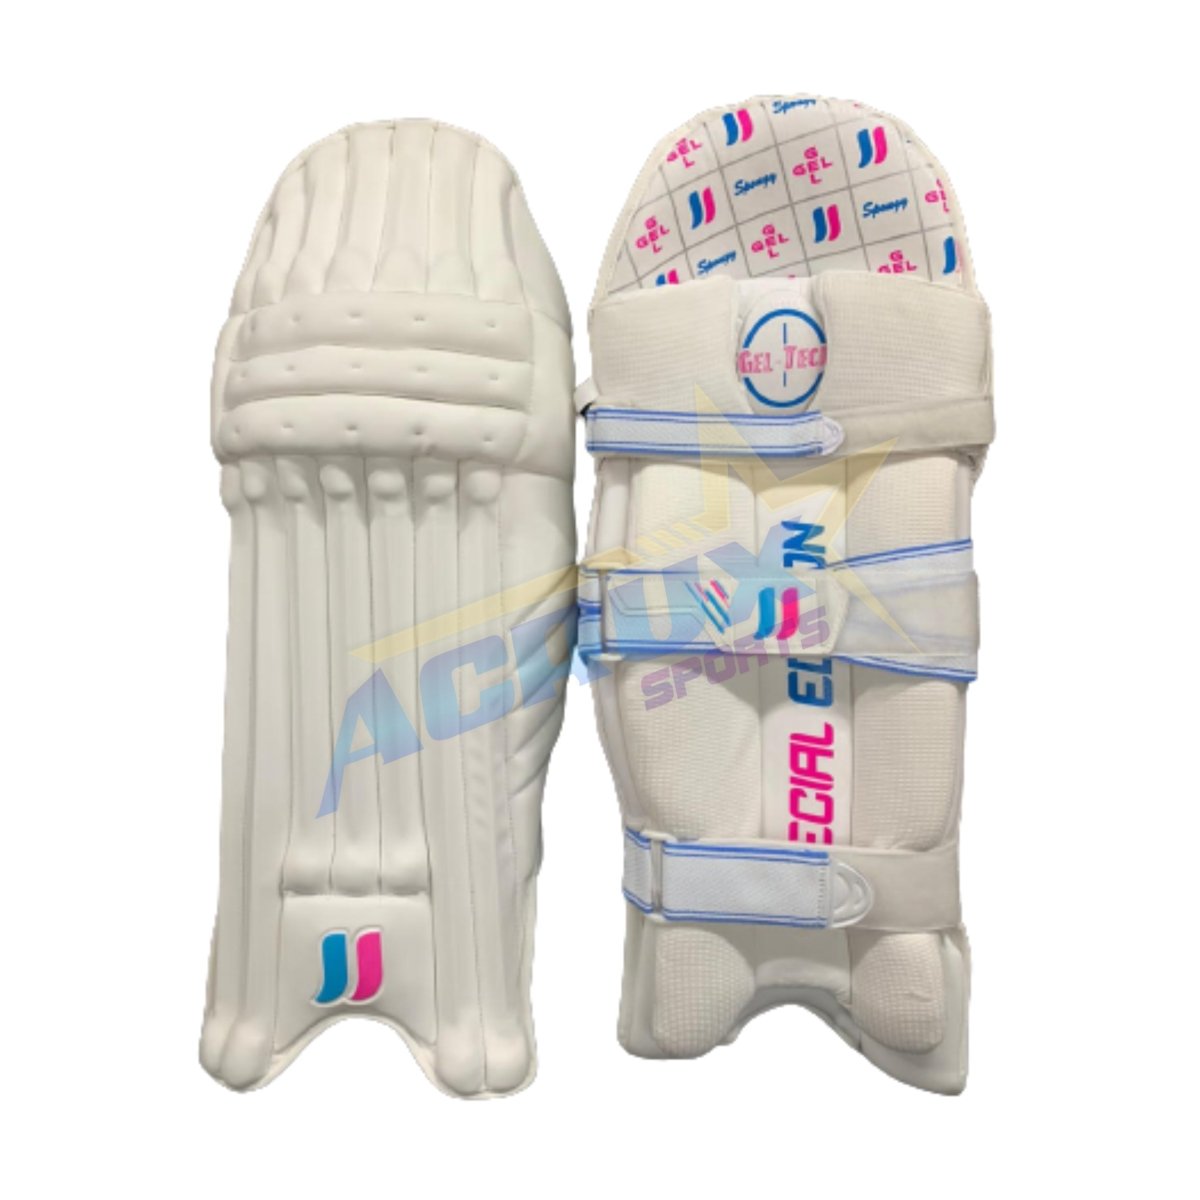 JJ Sports Special Edition Cricket Batting Pads.